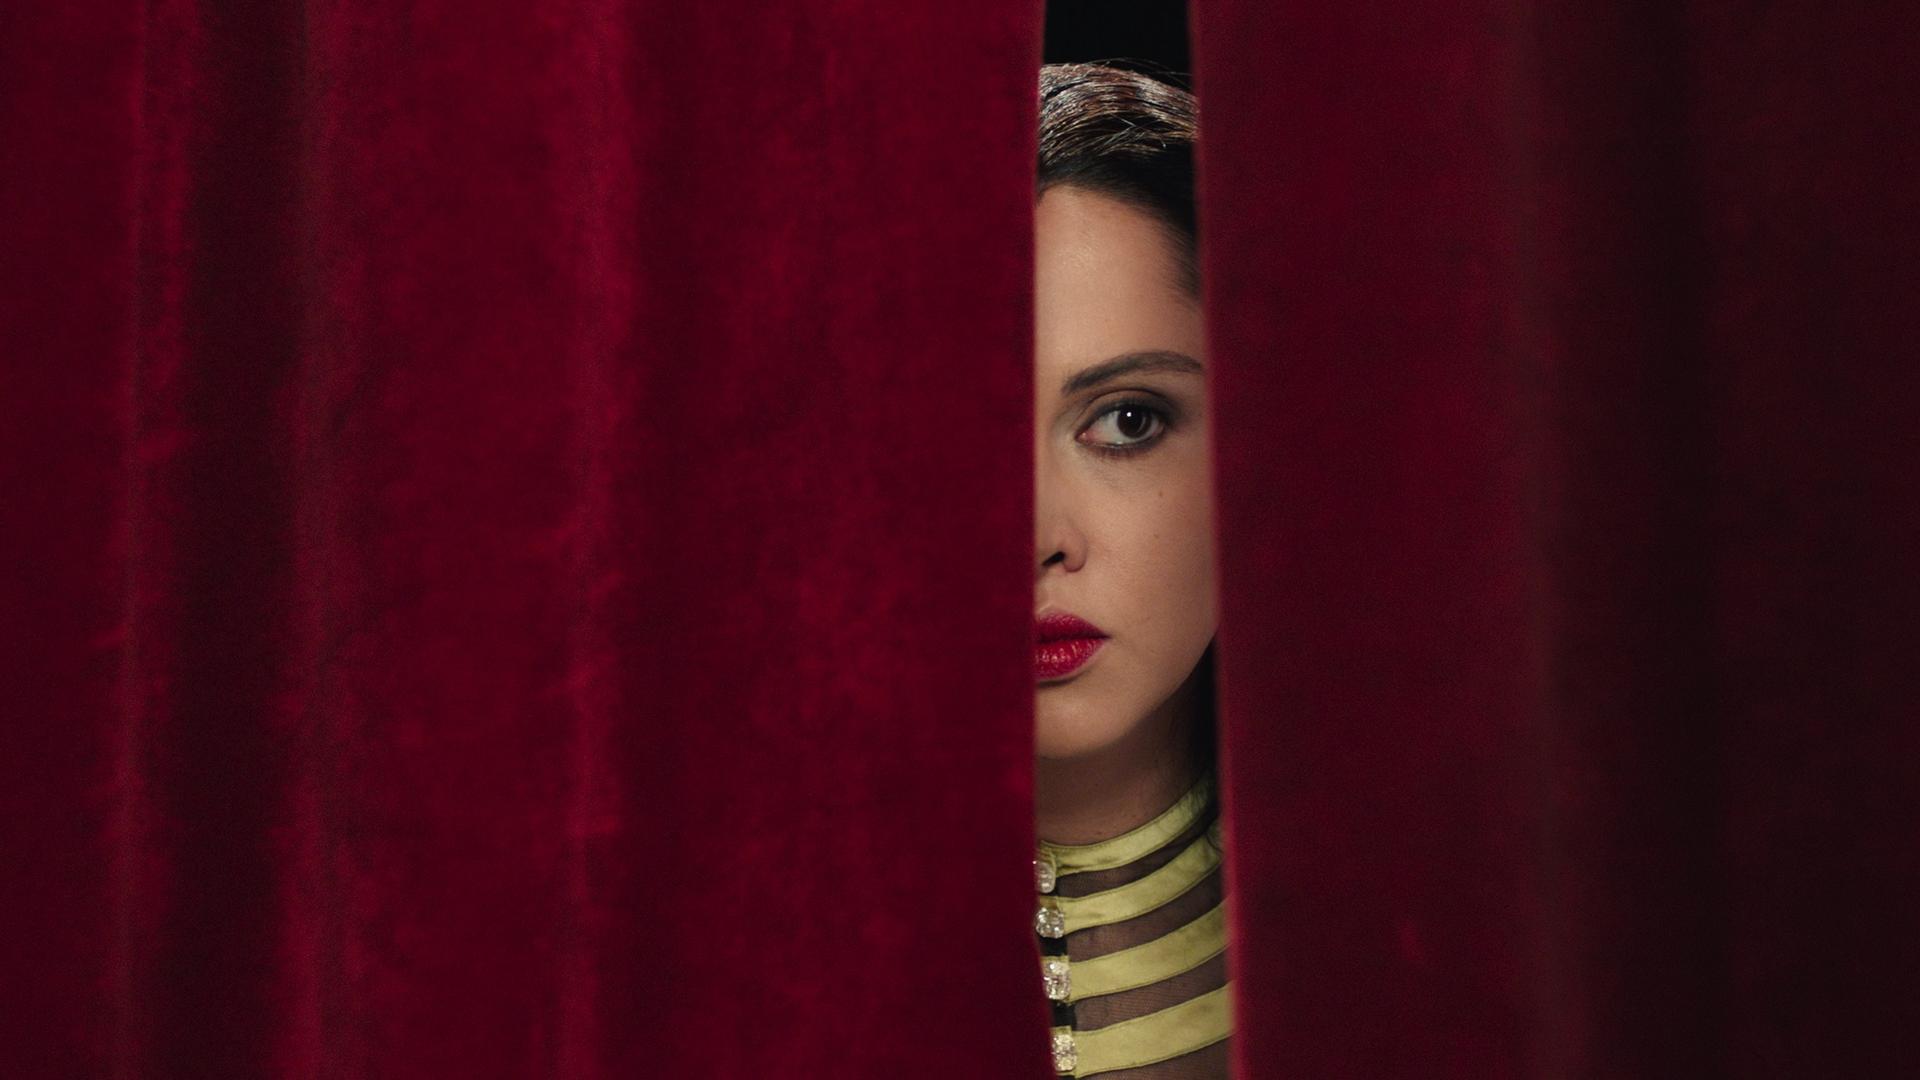 A still from Shirin Neshat's film Looking for Oum Kulthum Courtesy of the artist and Goodman Gallery. © Razor Film